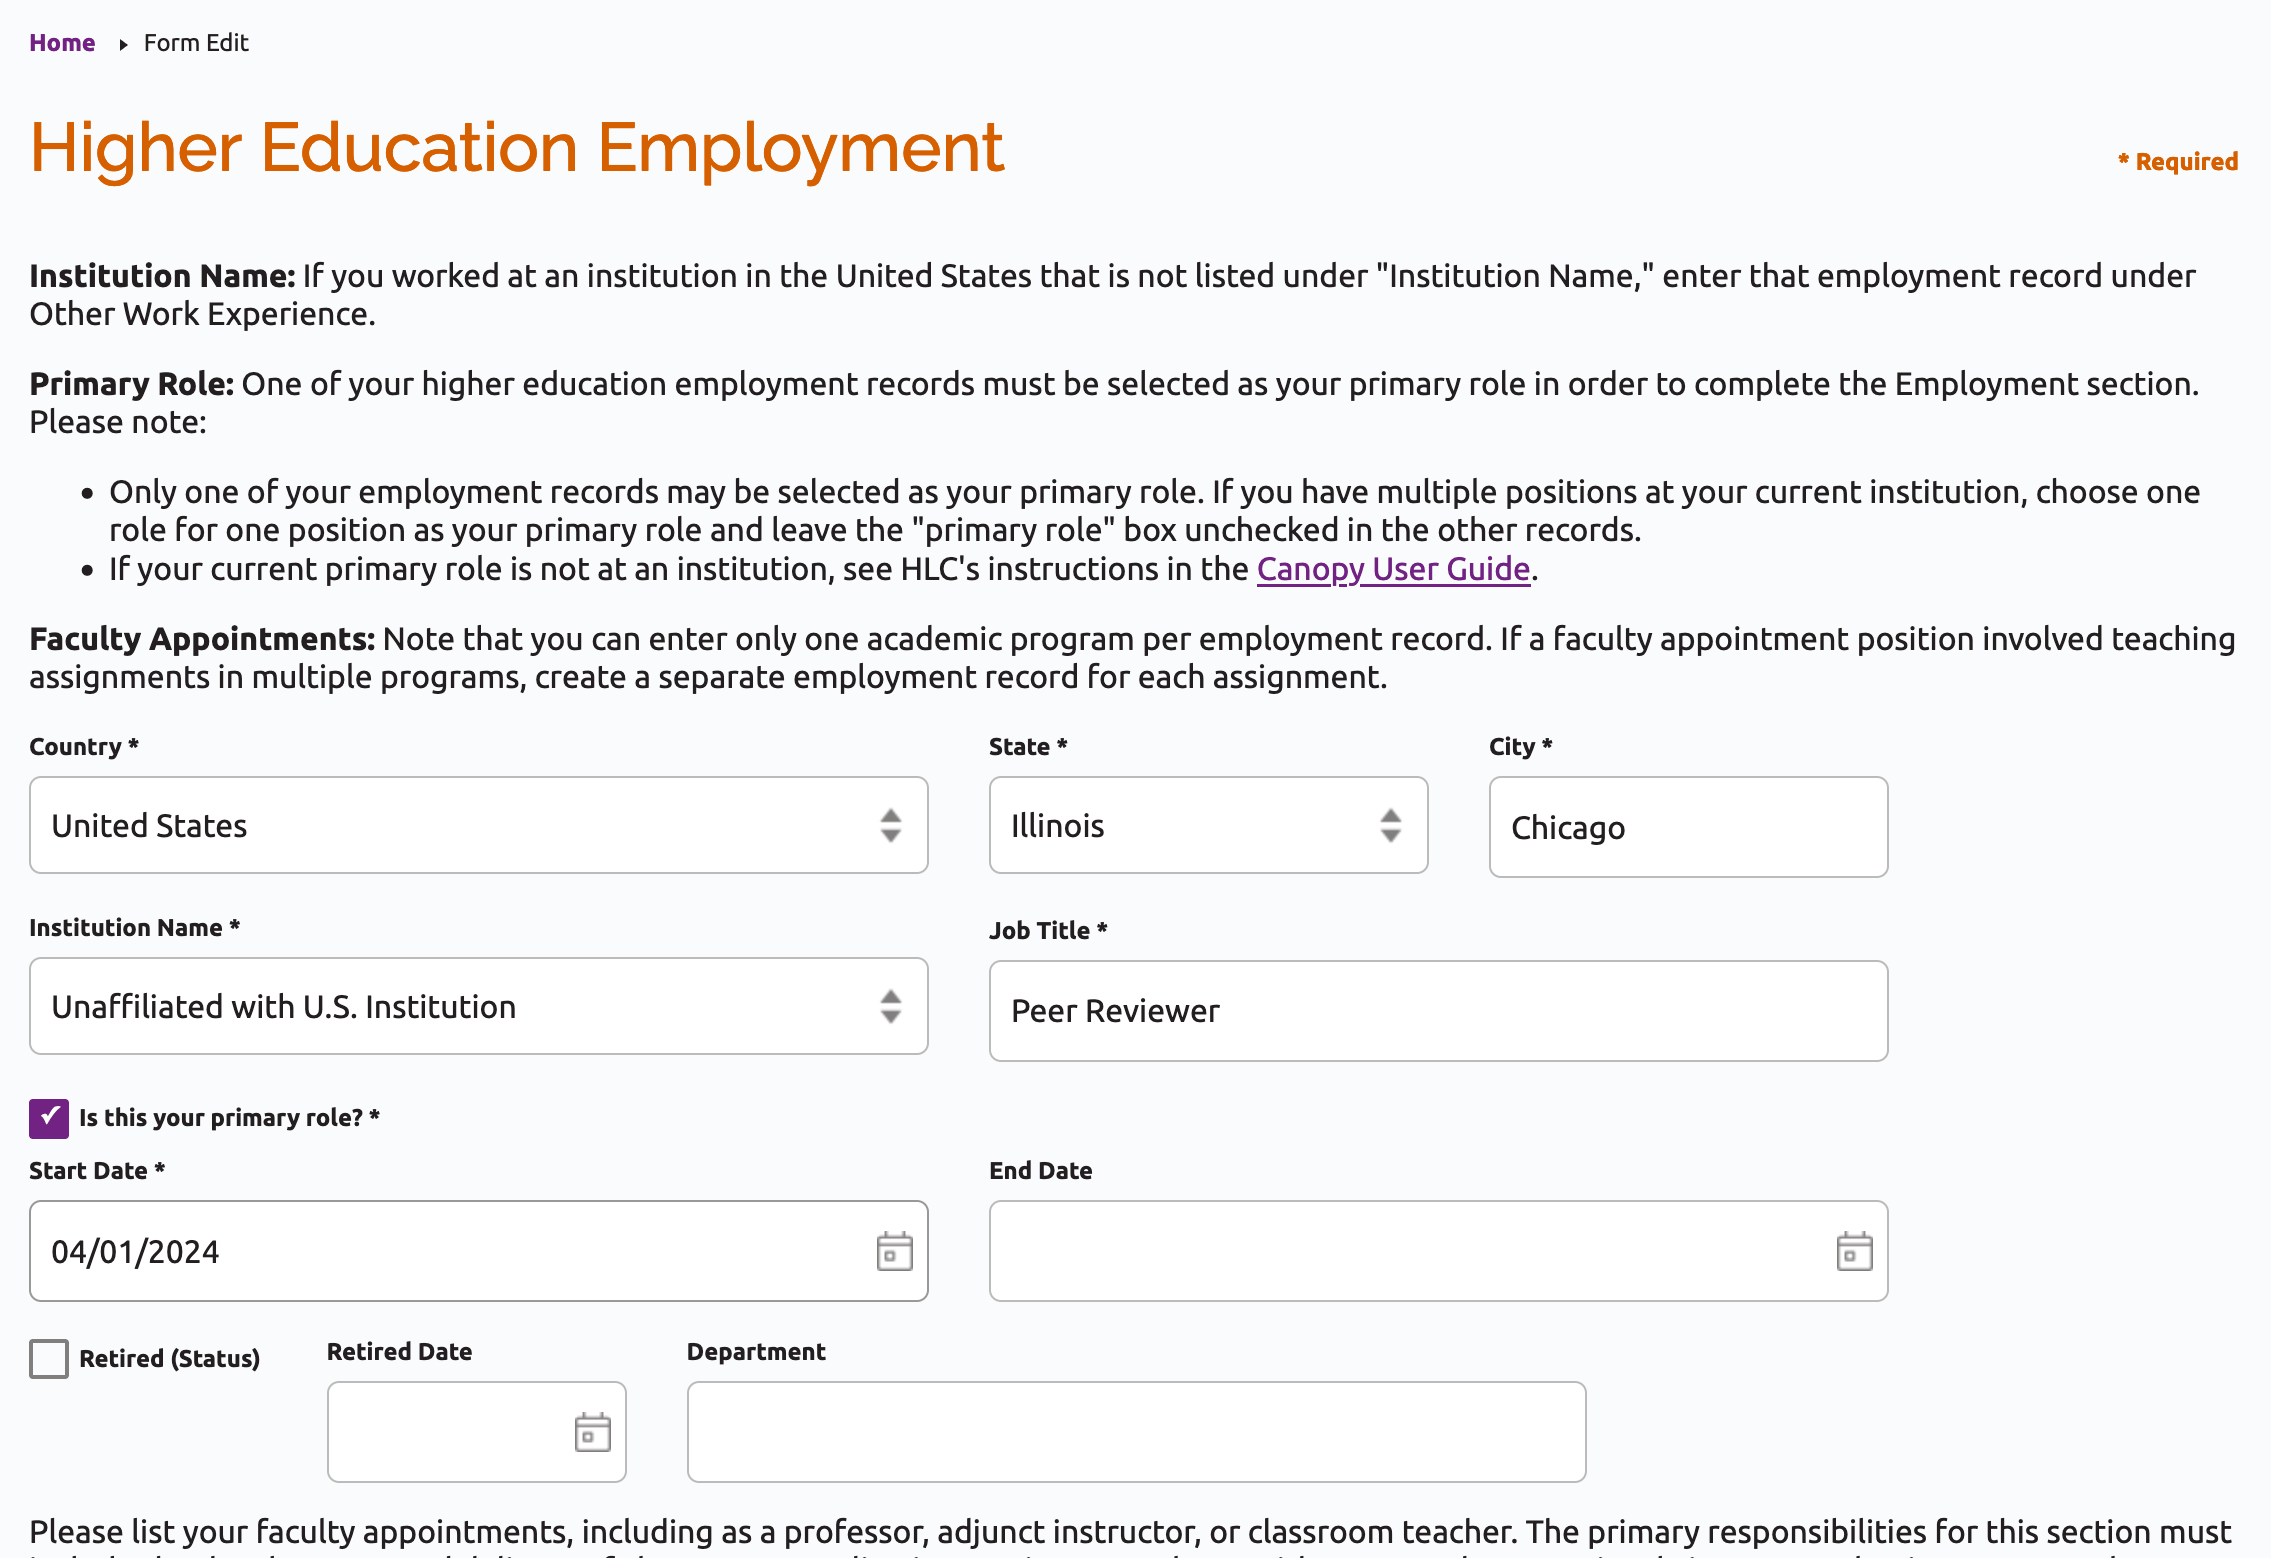 Higher Education Employment form for Peer Reviewer who is unaffiliated with a U.S. Institution